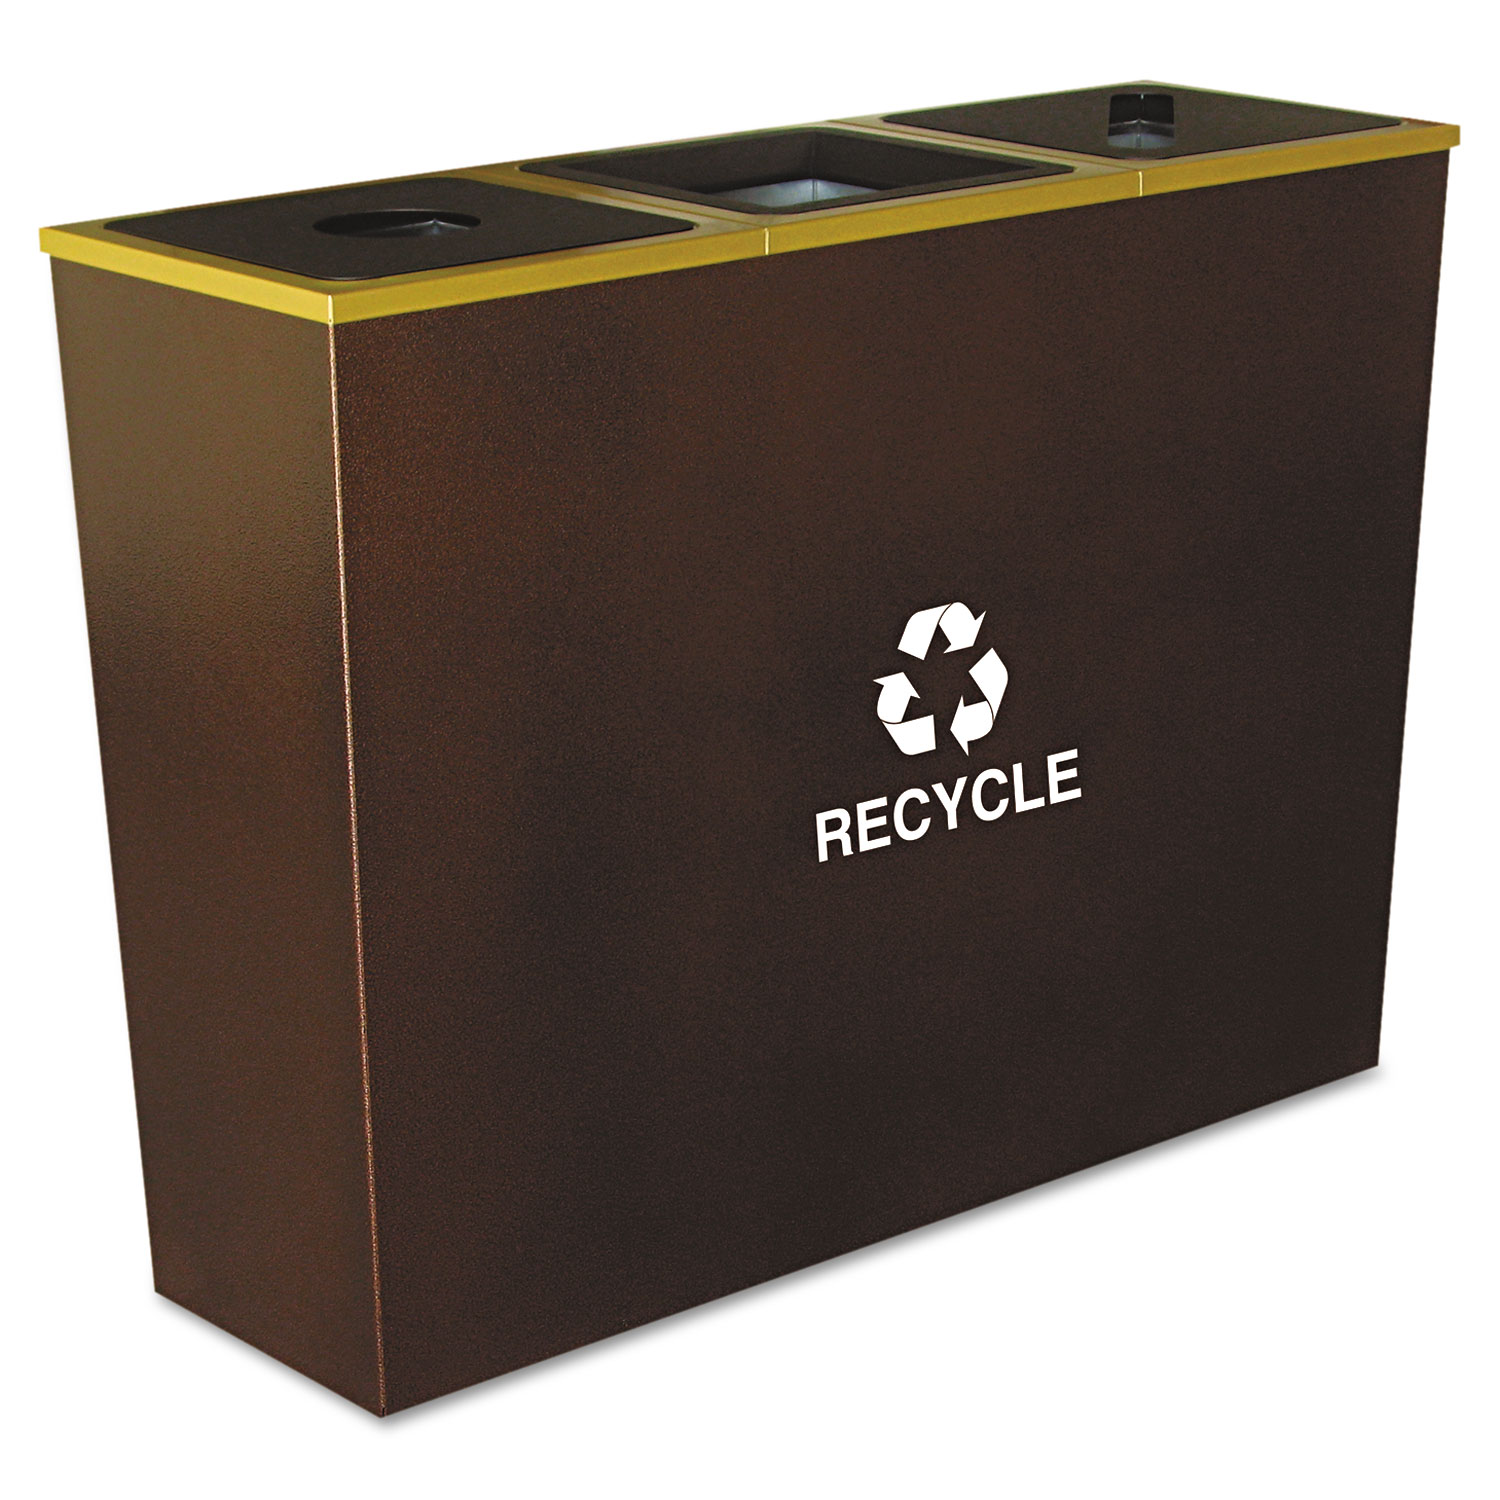  Ex-Cell RC-MTR-3 HCPR Metro Collection Recycling Receptacle, Triple Stream, Steel, 54 gal, Brown (EXCRCMTR3HCP) 